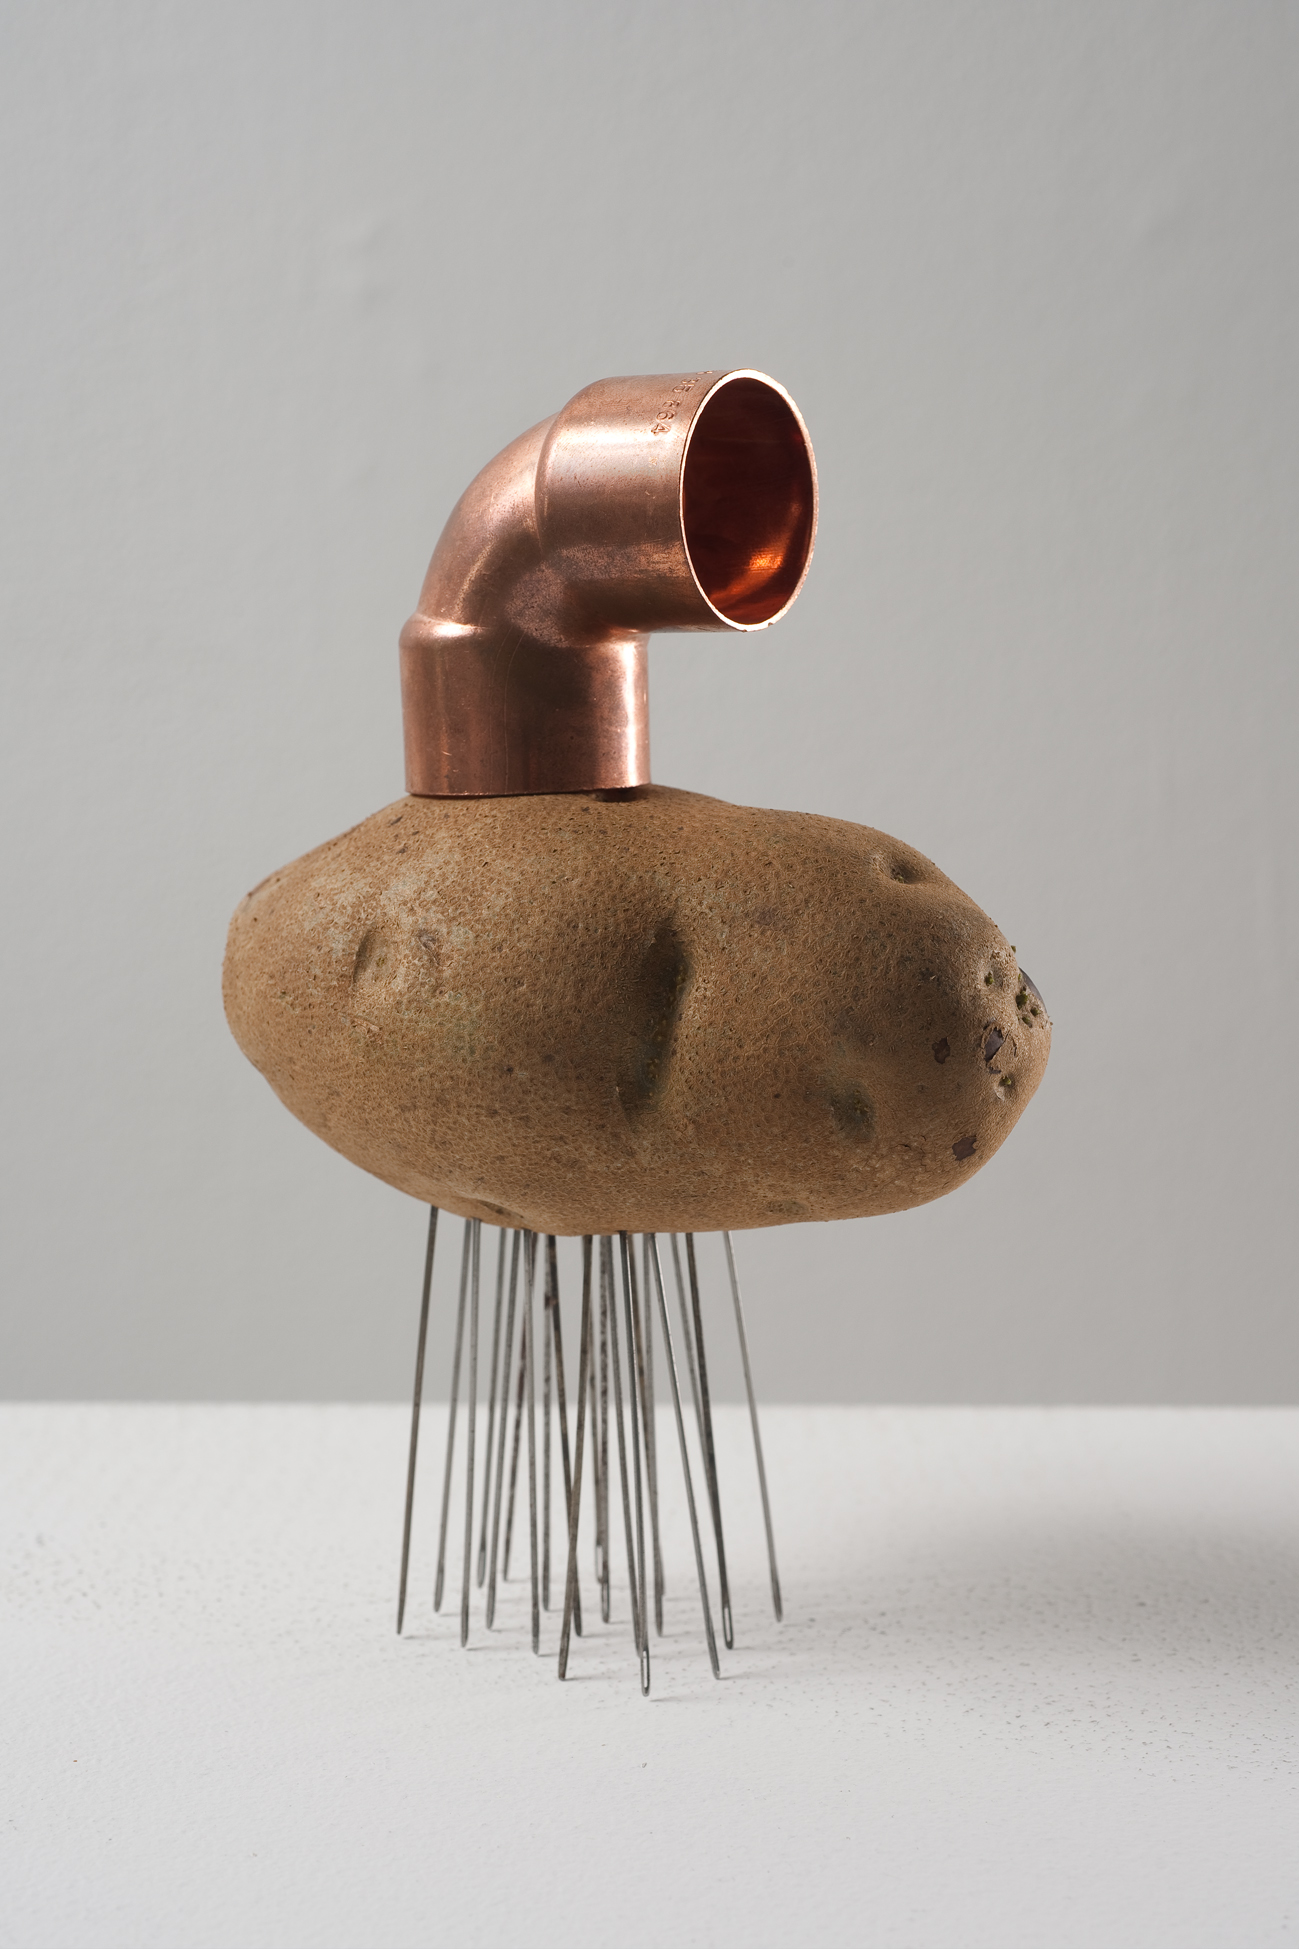 Amalia Pica - Instructions to make Catachresis #13 (elbow of the pipe, eye of the potato, eye of the needle), 2012